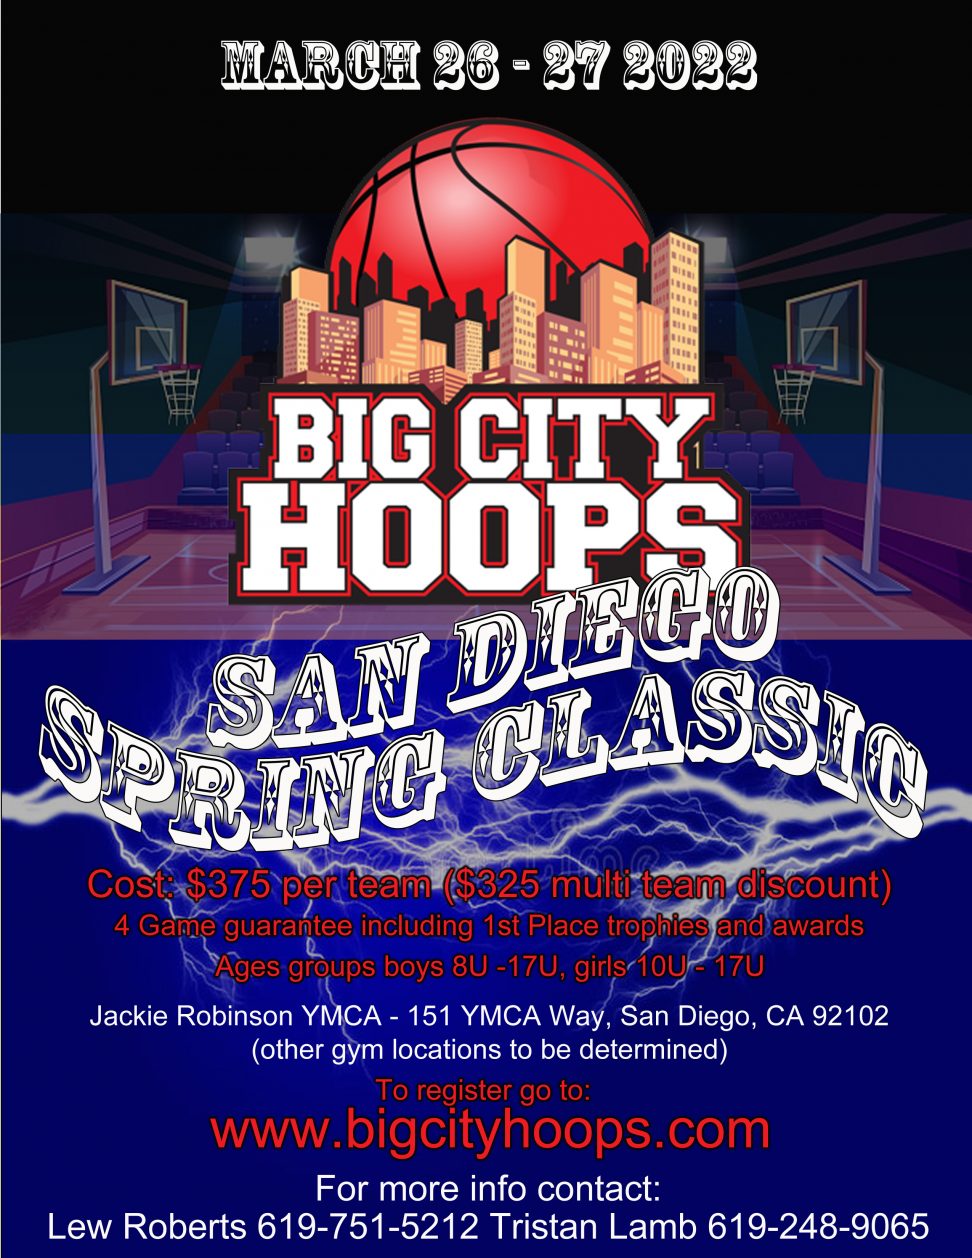 A poster for the big city hoops event.